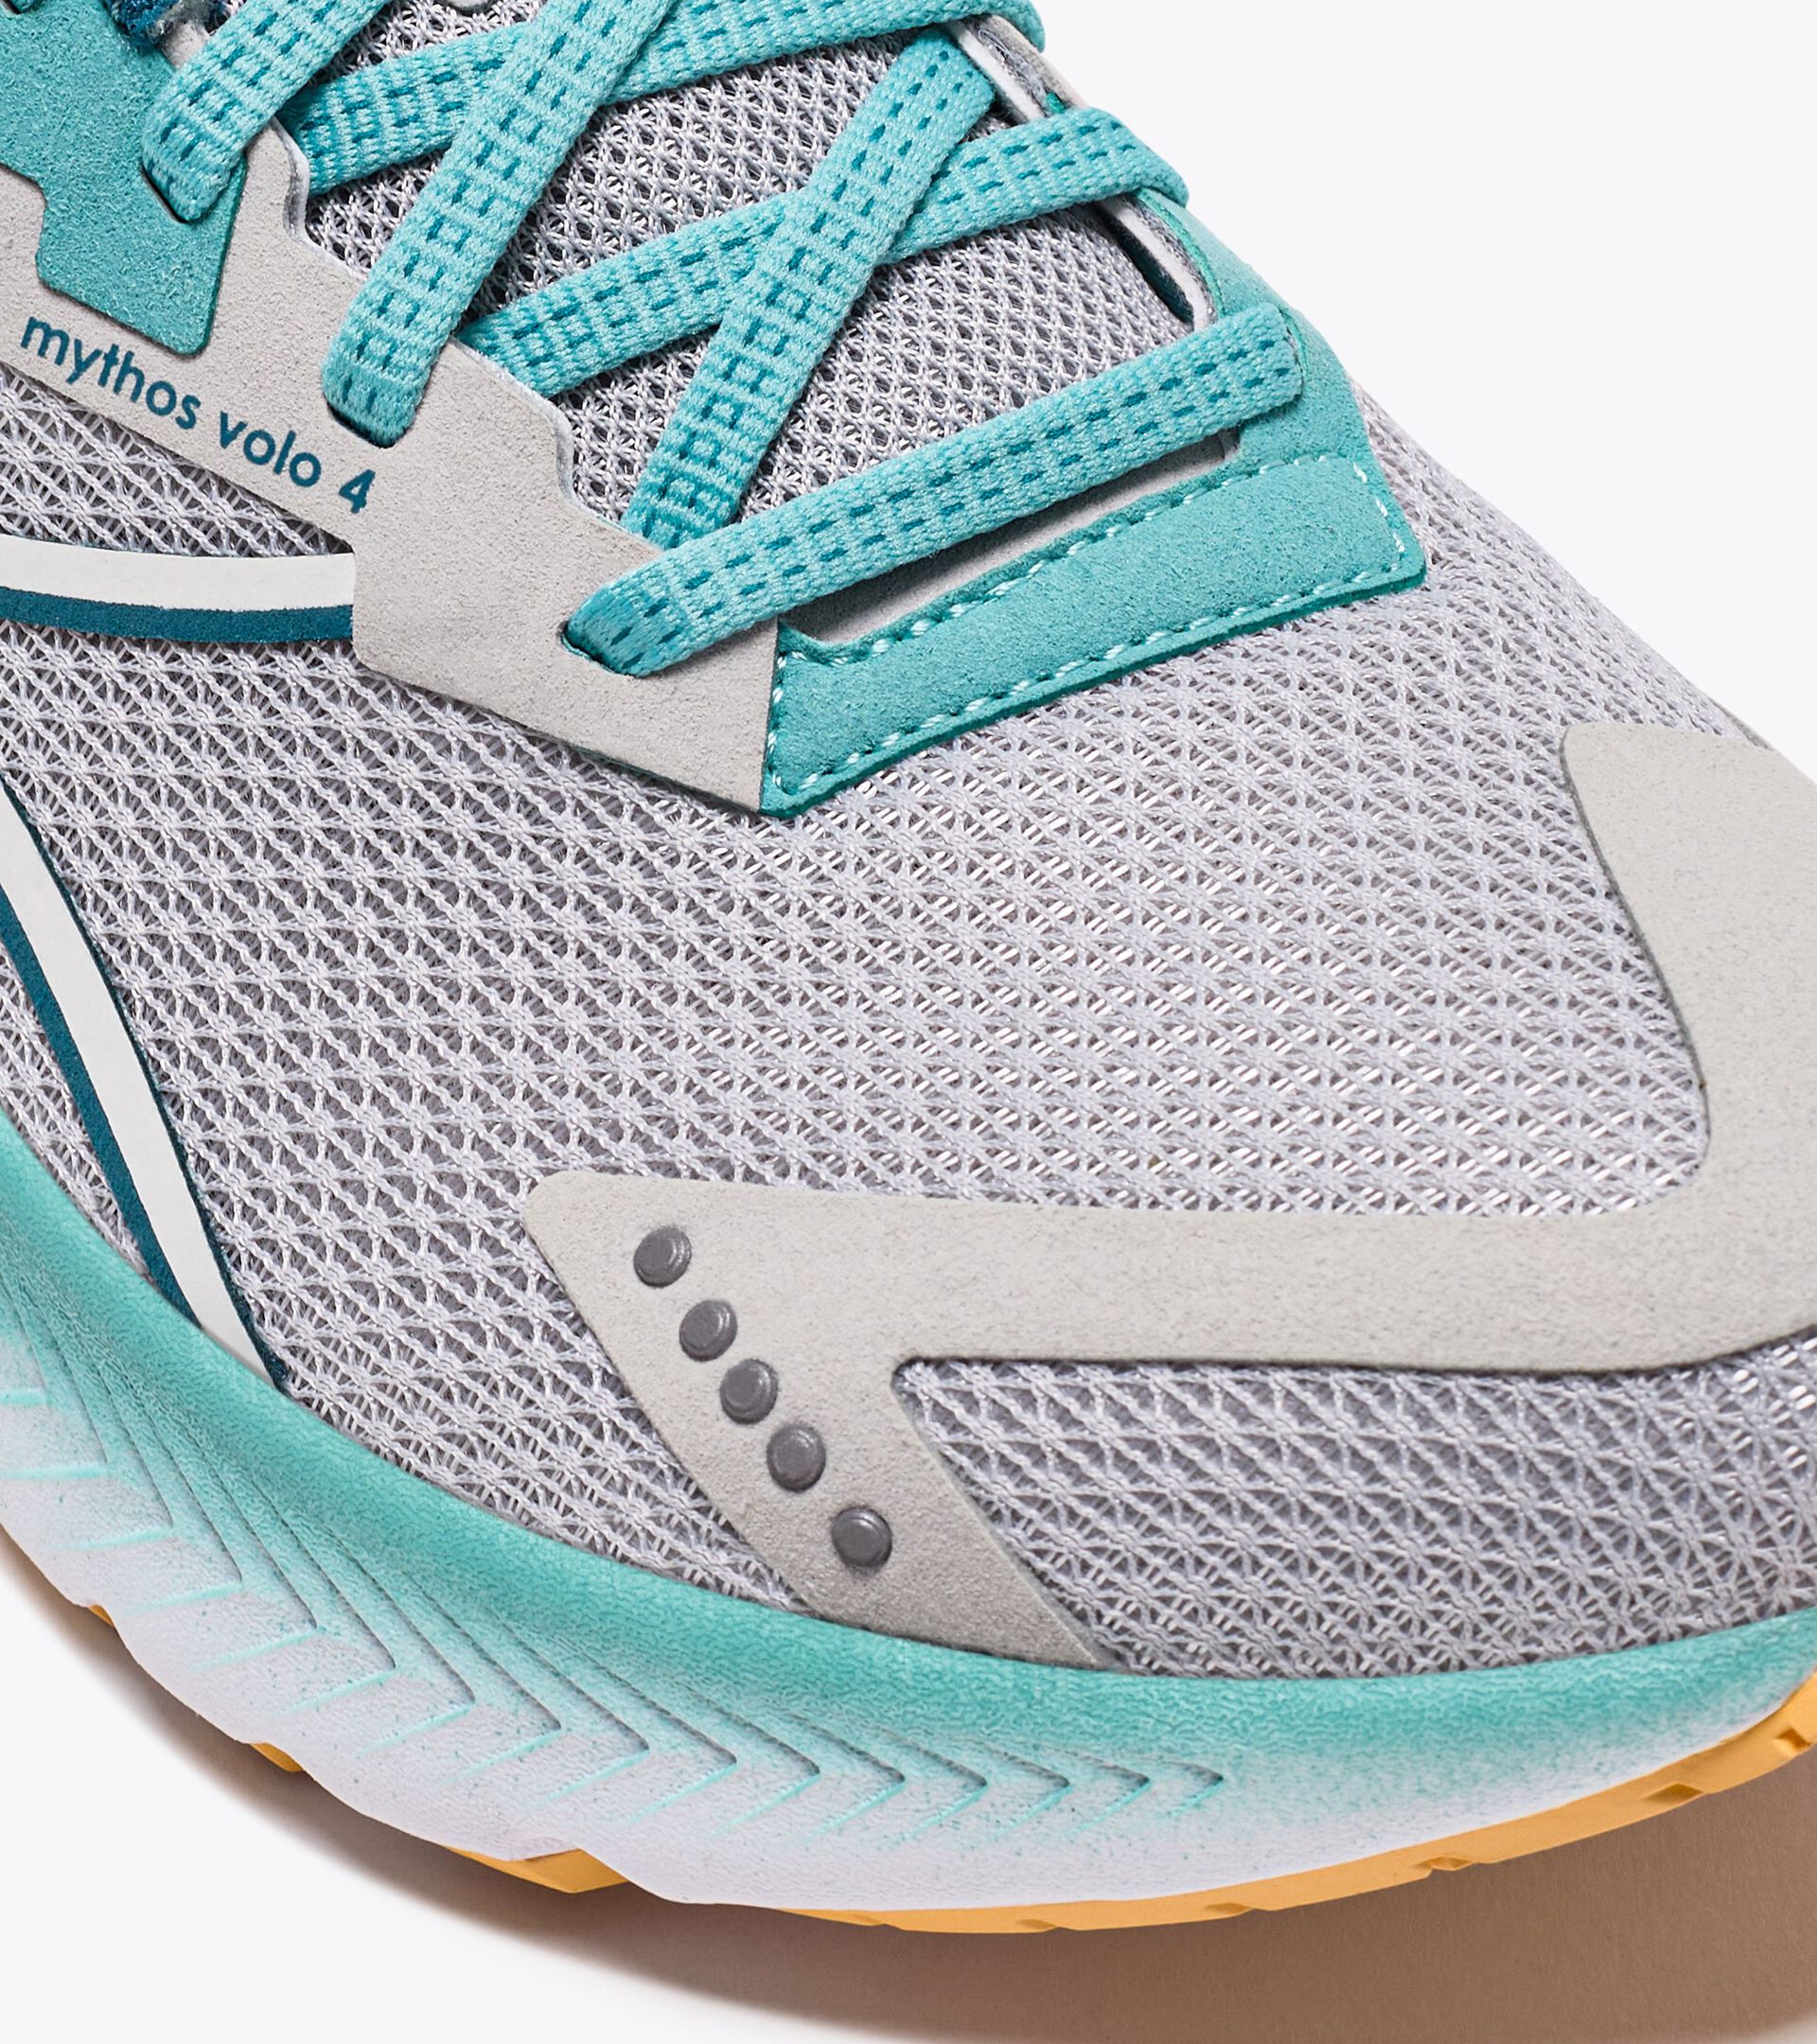 Running shoe - Stability and lightness - Donna MYTHOS BLUSHIELD VOLO 4 W SILVER DD/DUSTY TURQUOISE - Diadora